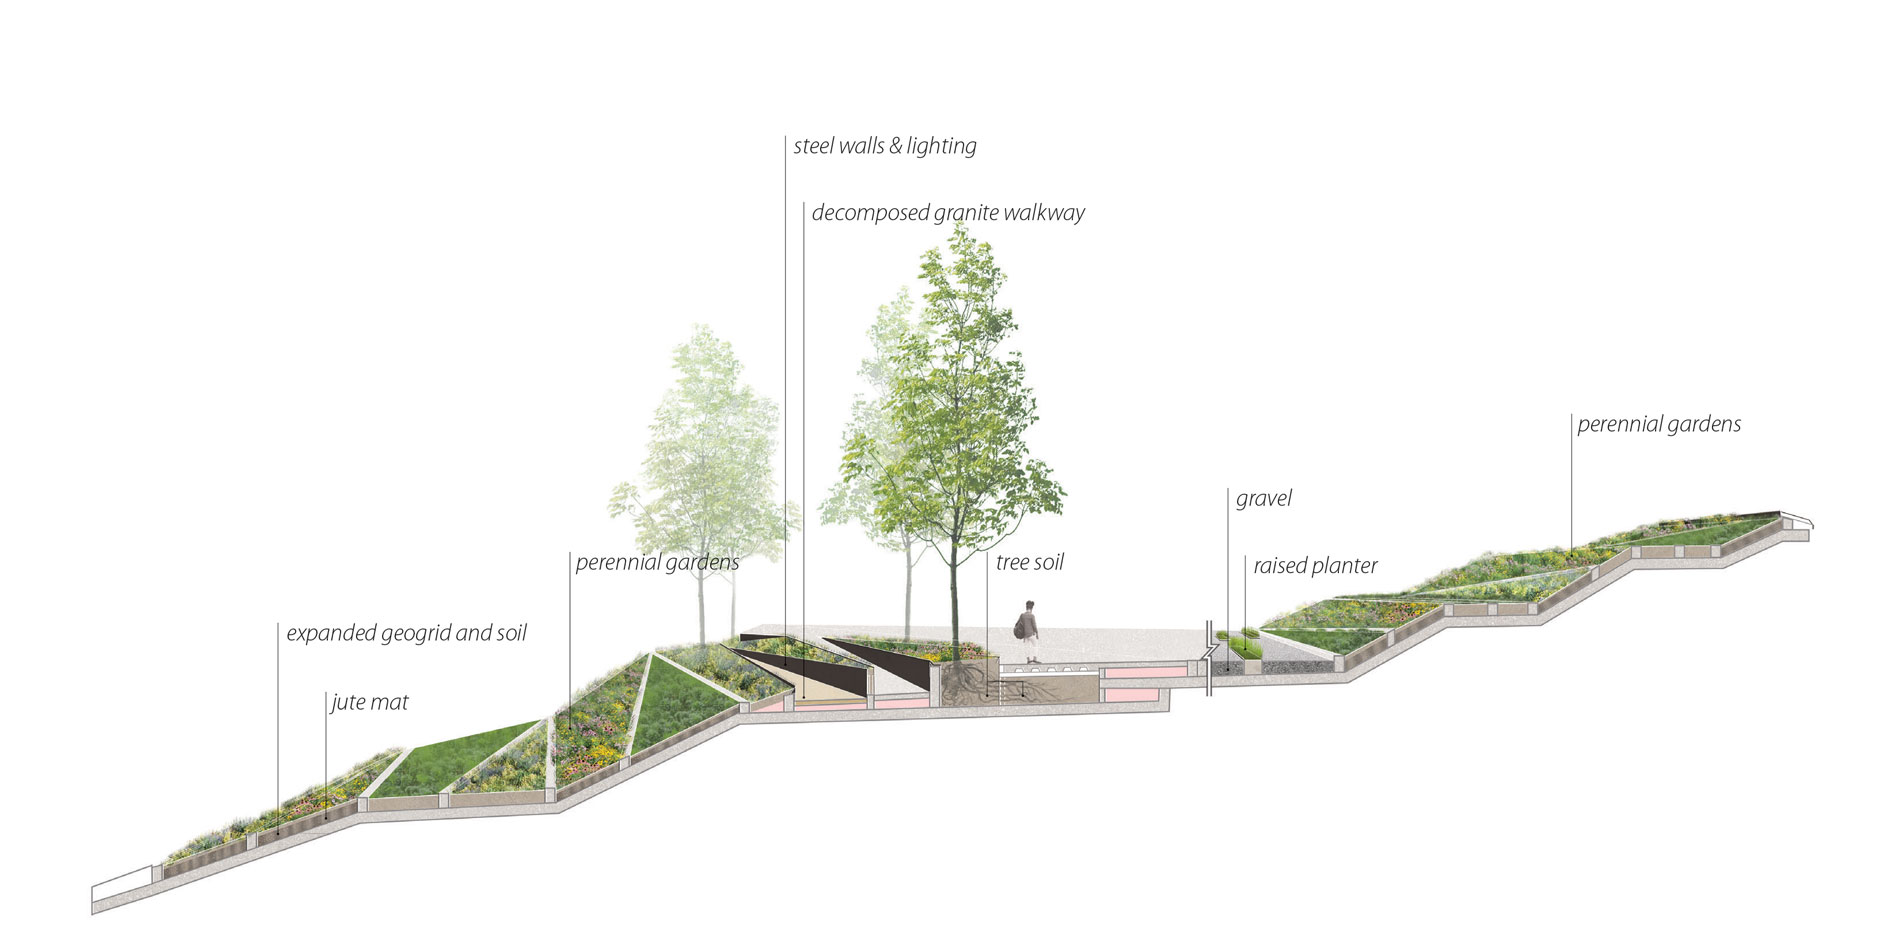 The folded plane of the green roof spans 30 vertical feet, offering clear views of it from the nearby Burnside Bridge.…